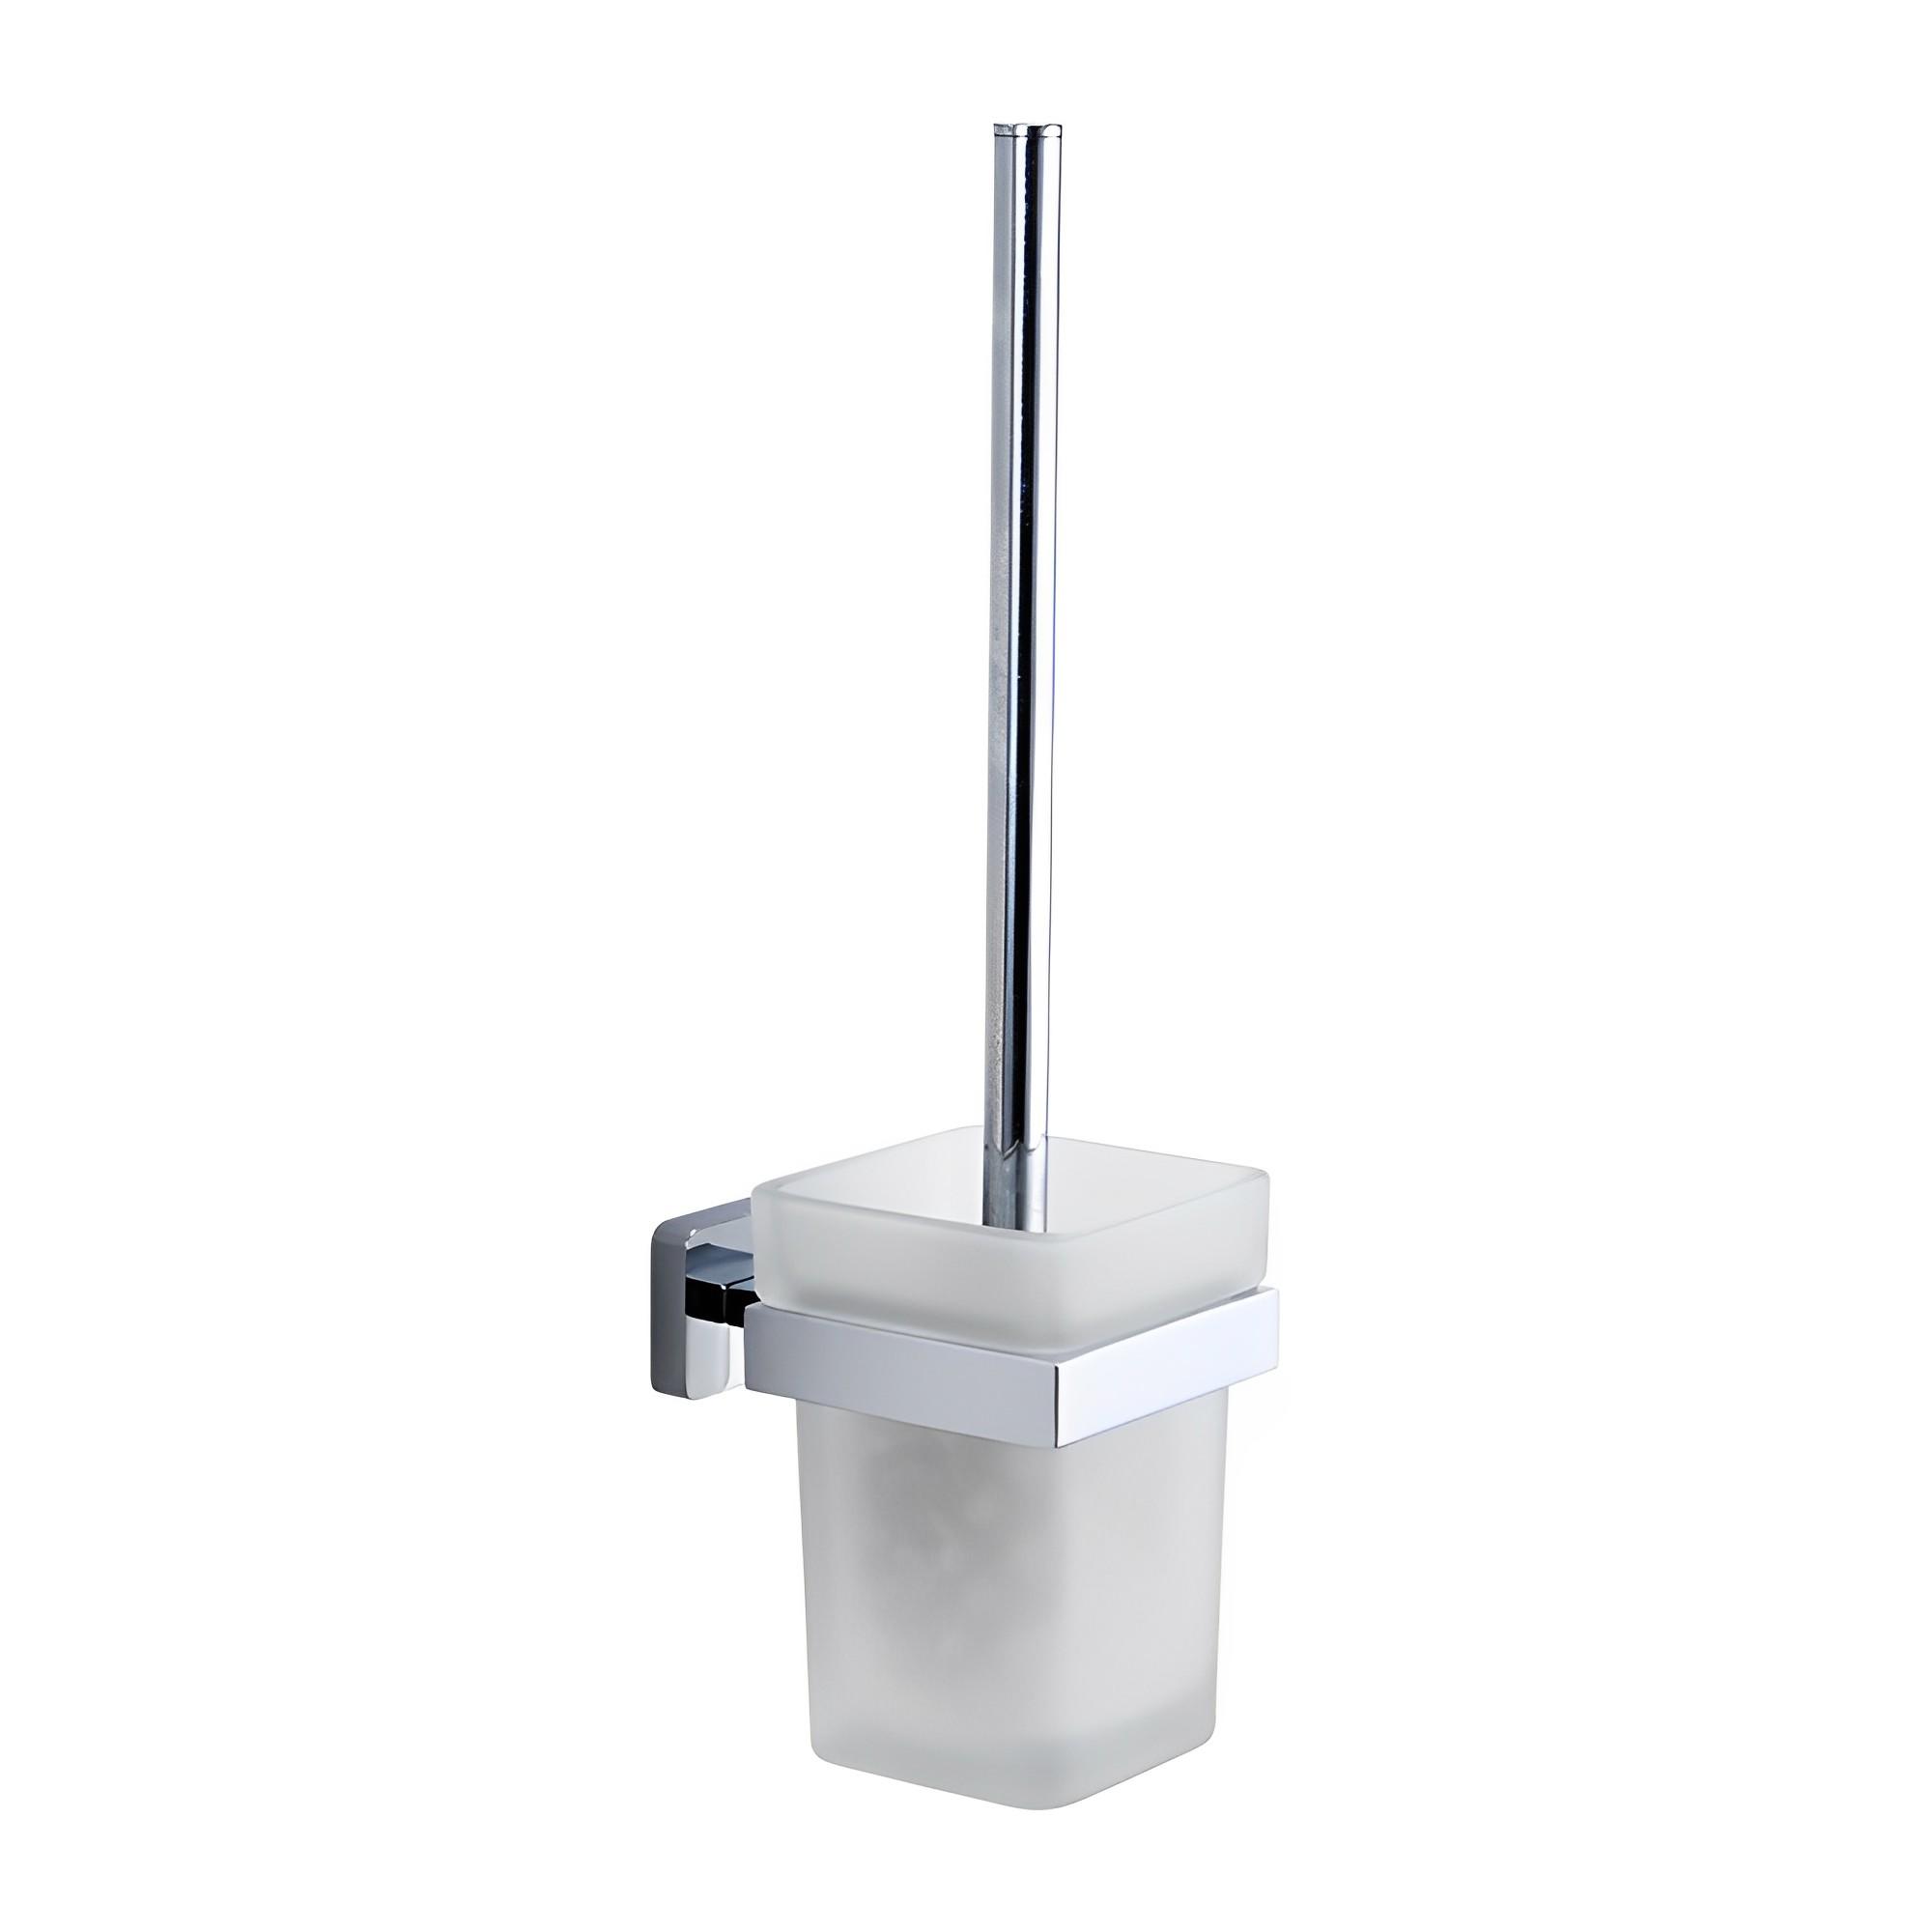 OJ-G1119L  Toilet Brush Holder Chrome Plated Wall Mounted With Glass Container Zinc Alloy Bathroom Accessories